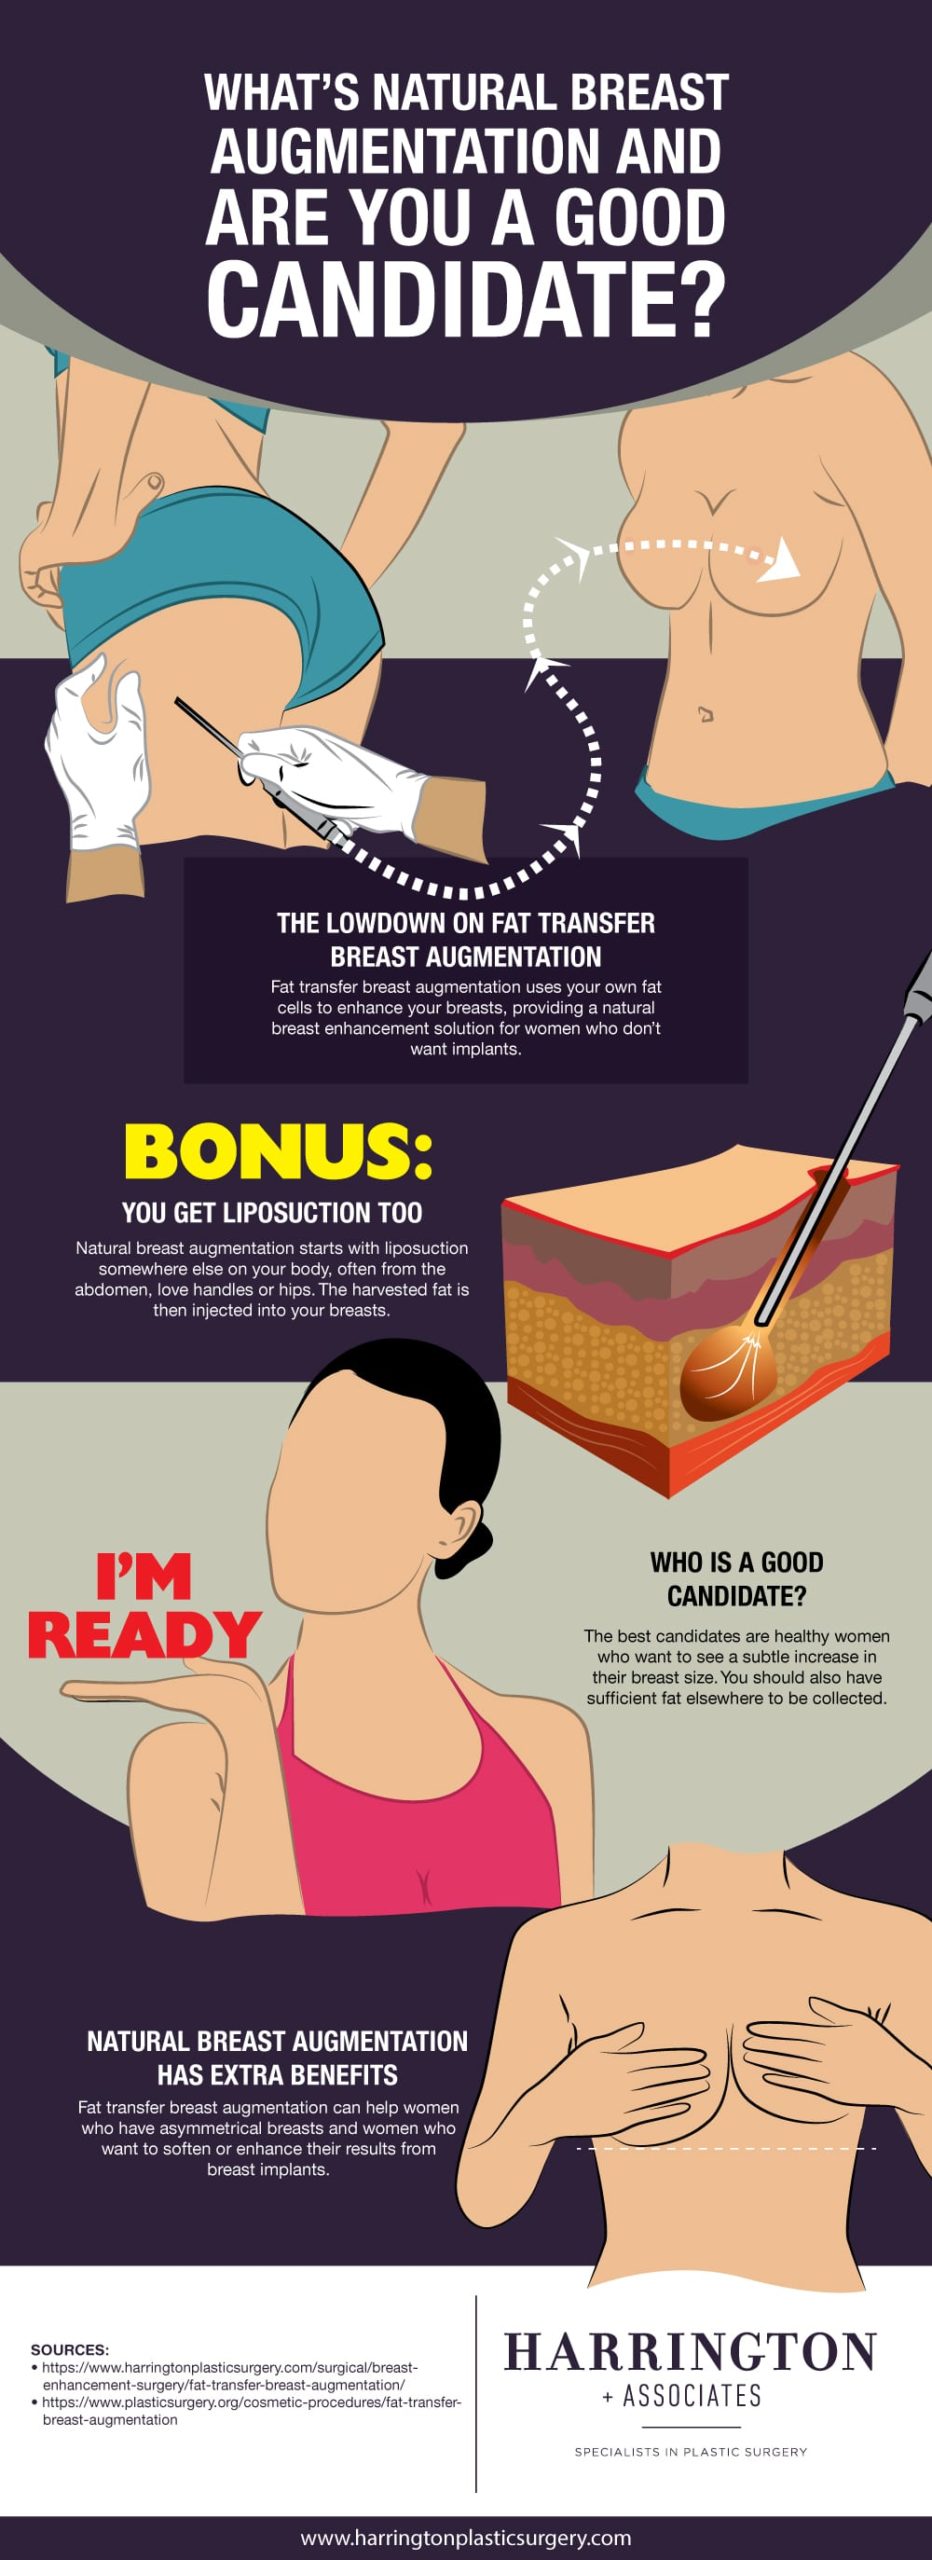 What’s Natural Breast Augmentation? Are You a Candidate? [Infographic]